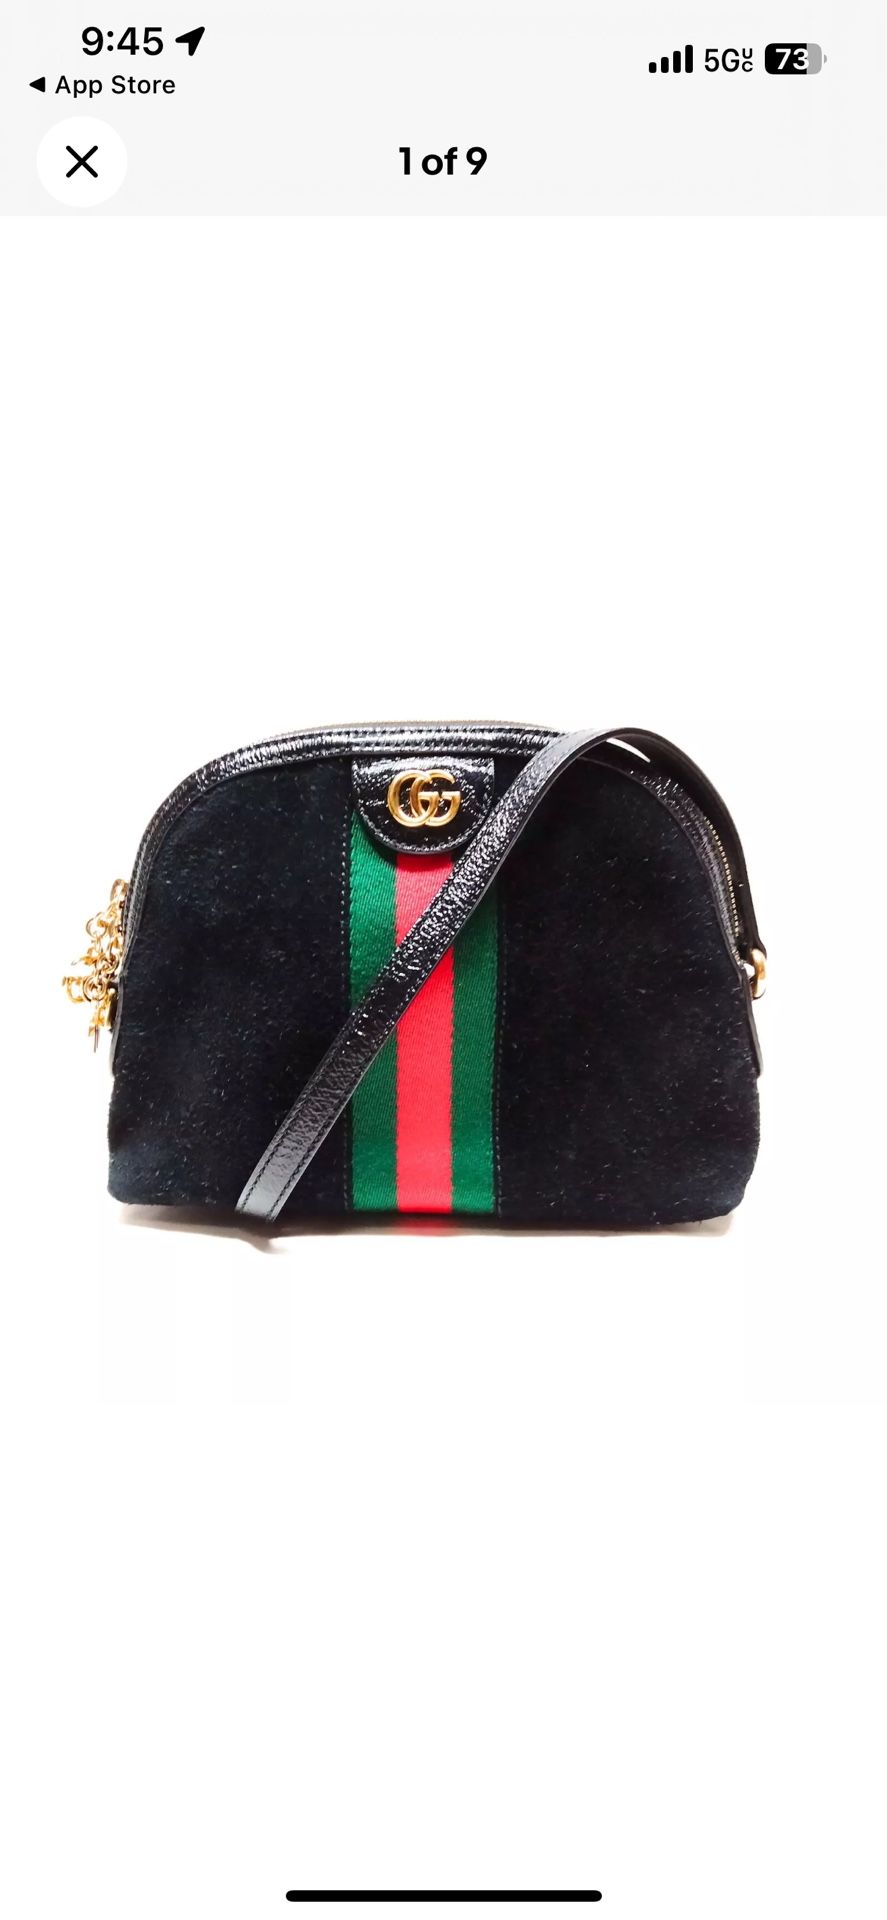  Gucci Suede Patent Web GG Small Ophidia Dome Shoulder Bag Black image 2 of 9 Gucci Suede Patent Web GG Small Ophidia Dome Shoulder Bag Black image 3 